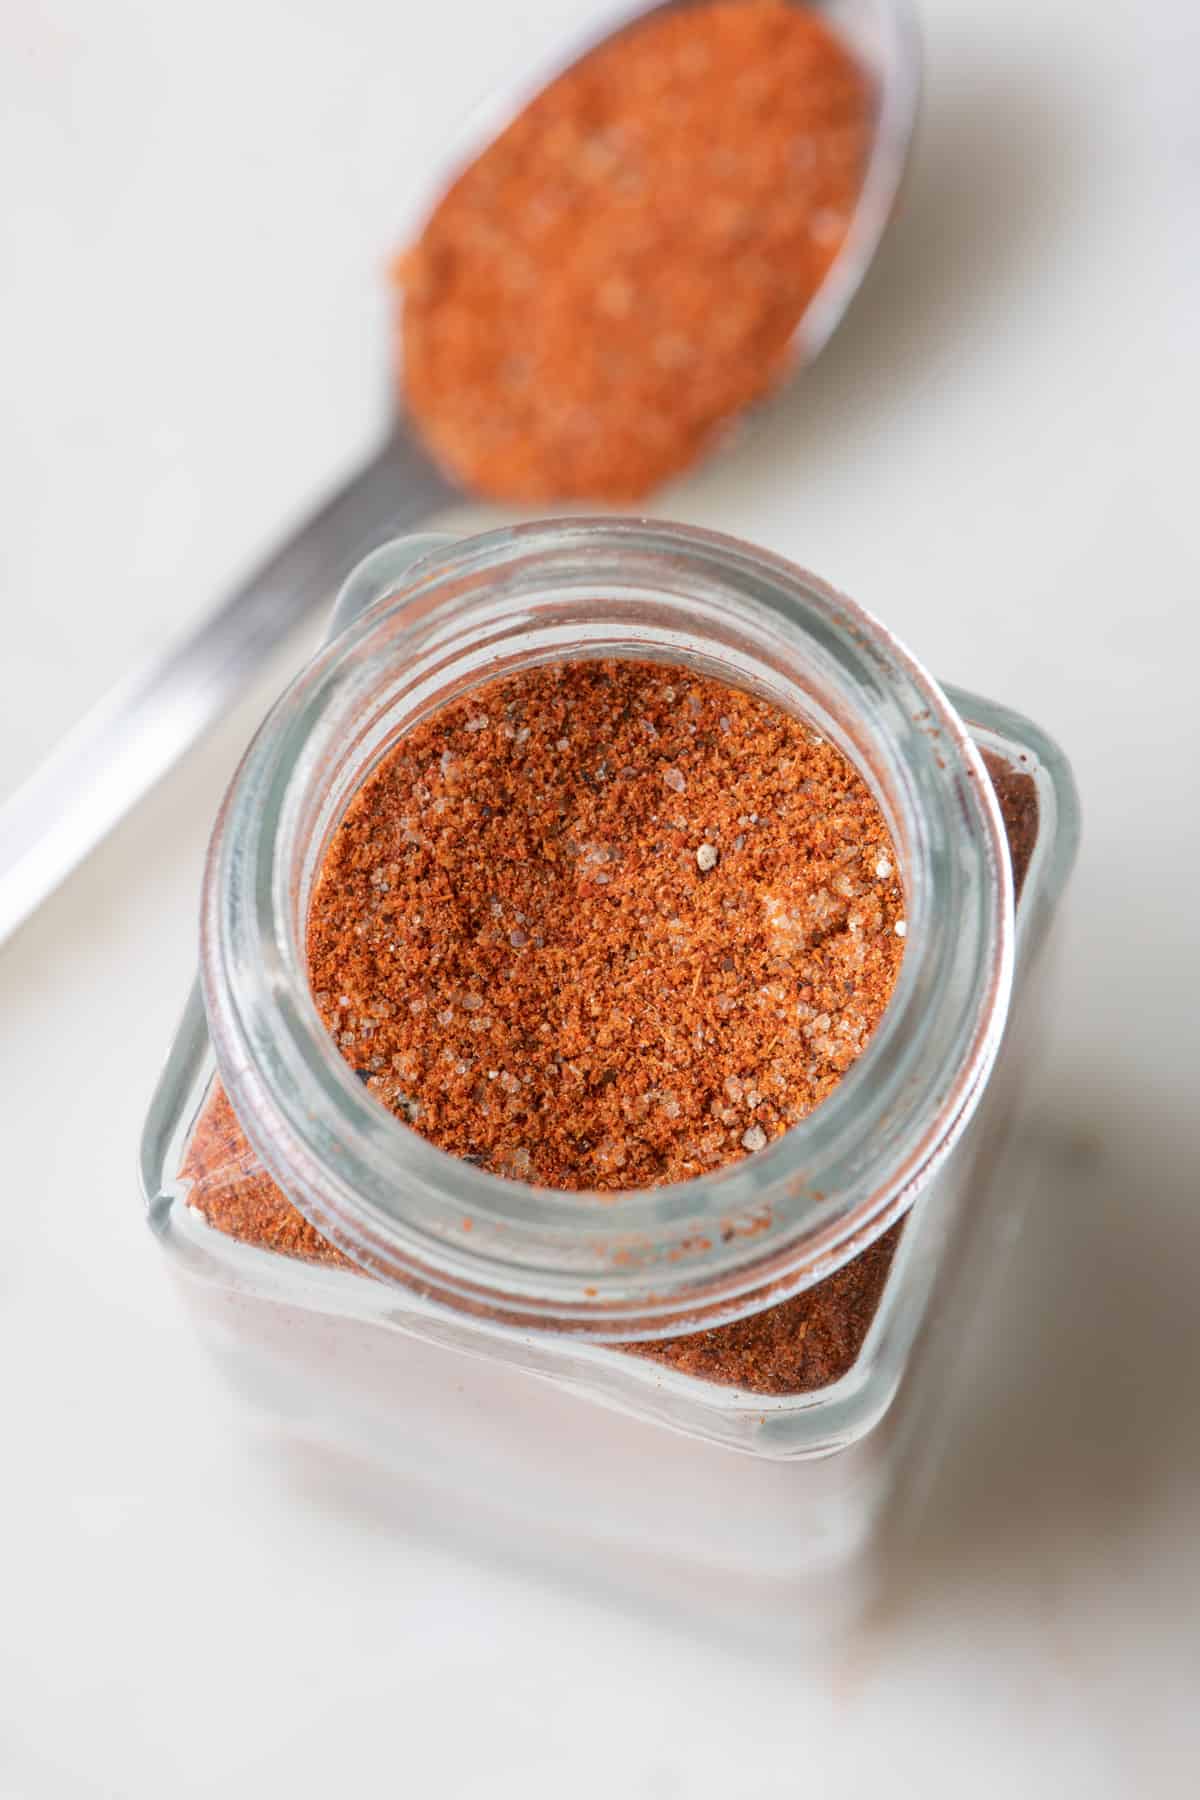 Top down view into a jar with bbq spice blend.